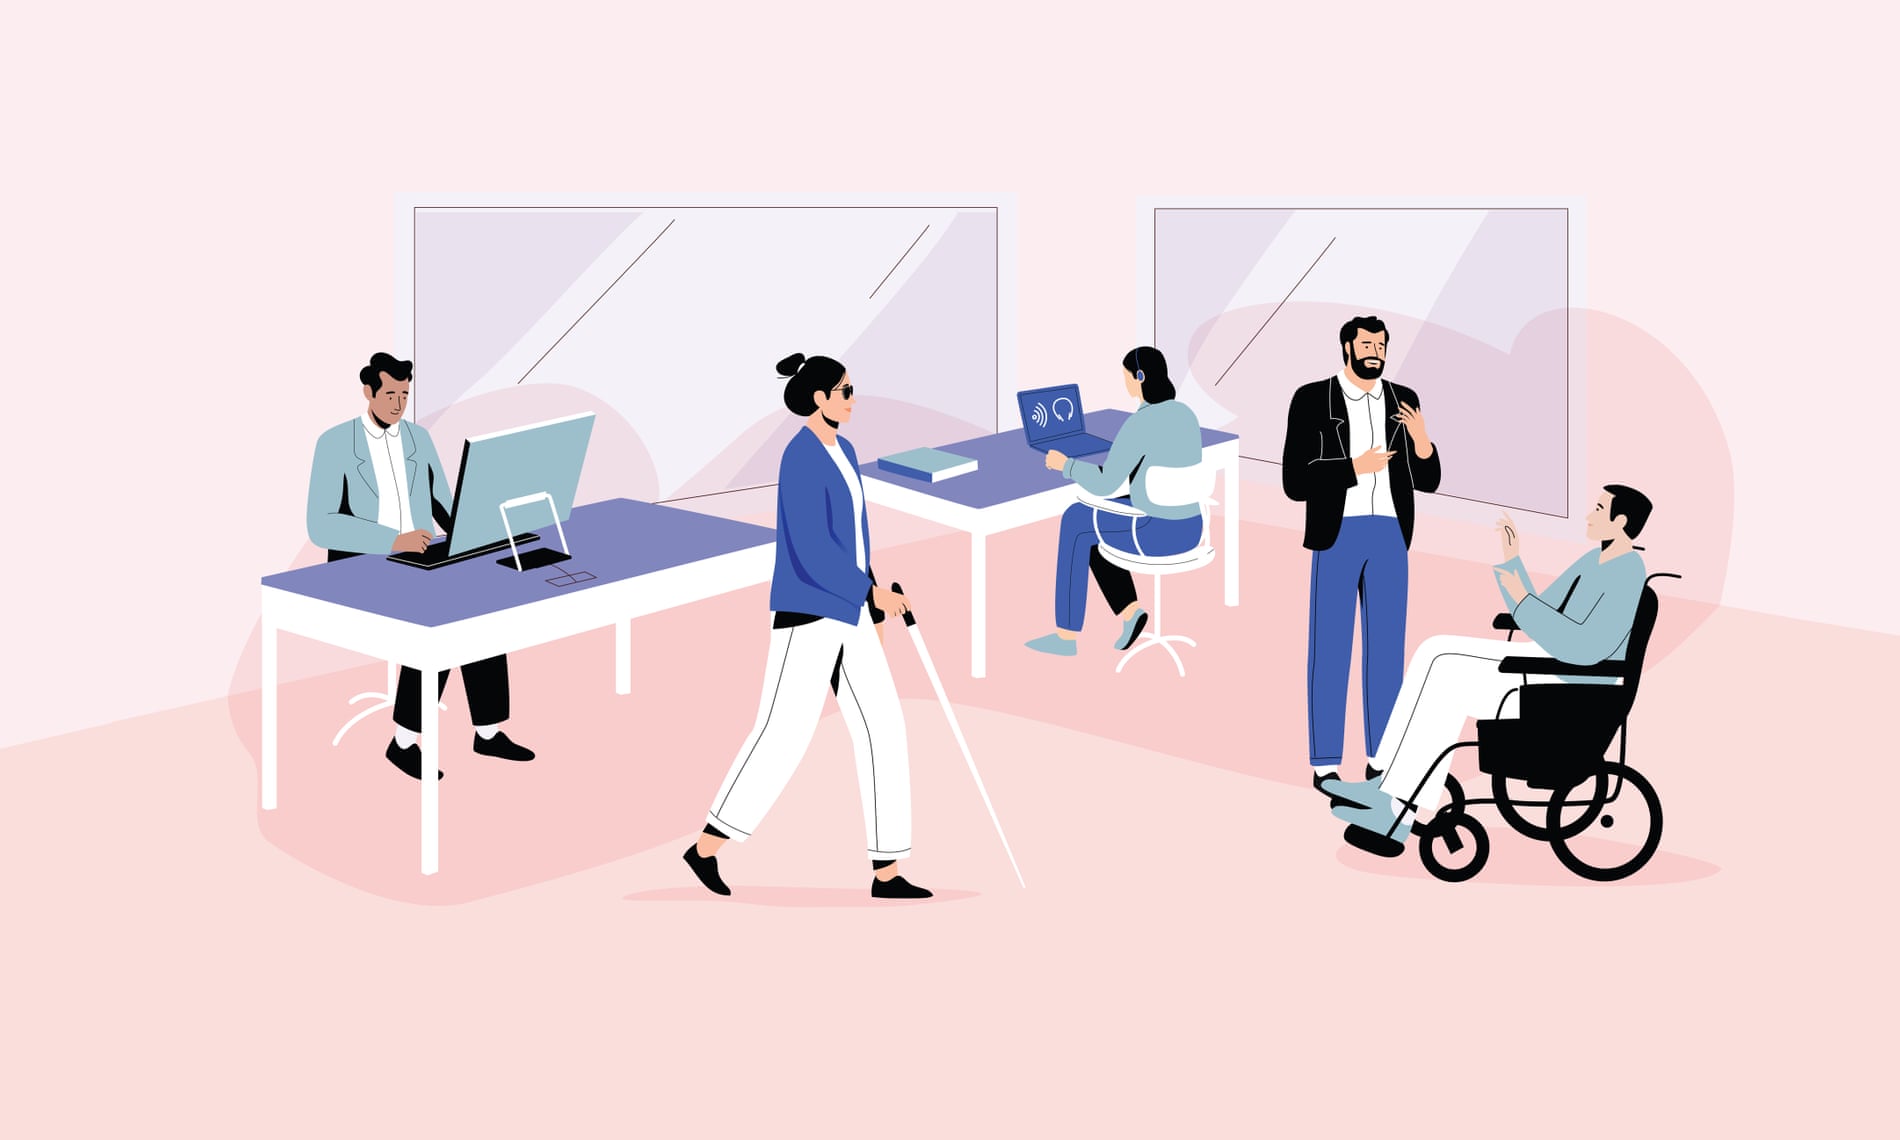 How a new wave of accessibility tech is bringing benefits to all